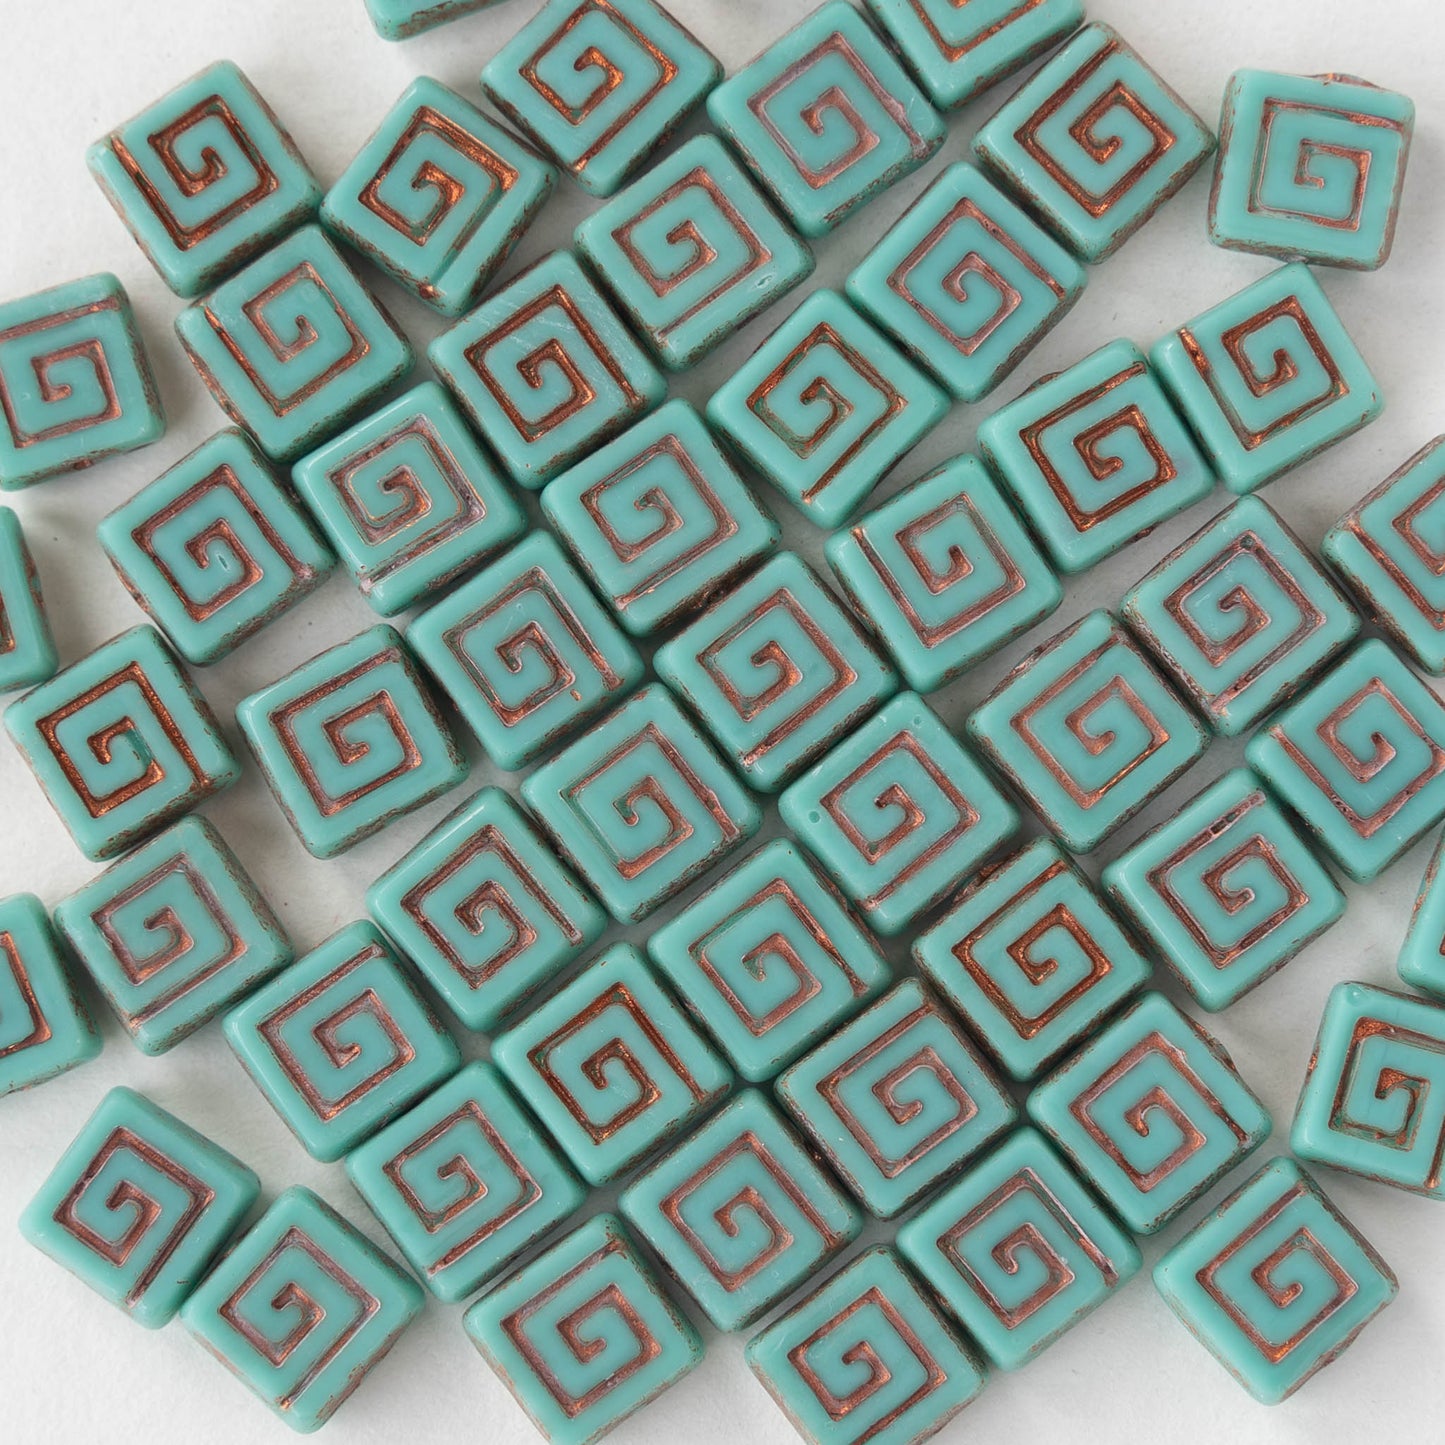 9mm Glass Tile Beads - Opaque Turquoise with Gold Wash - 10